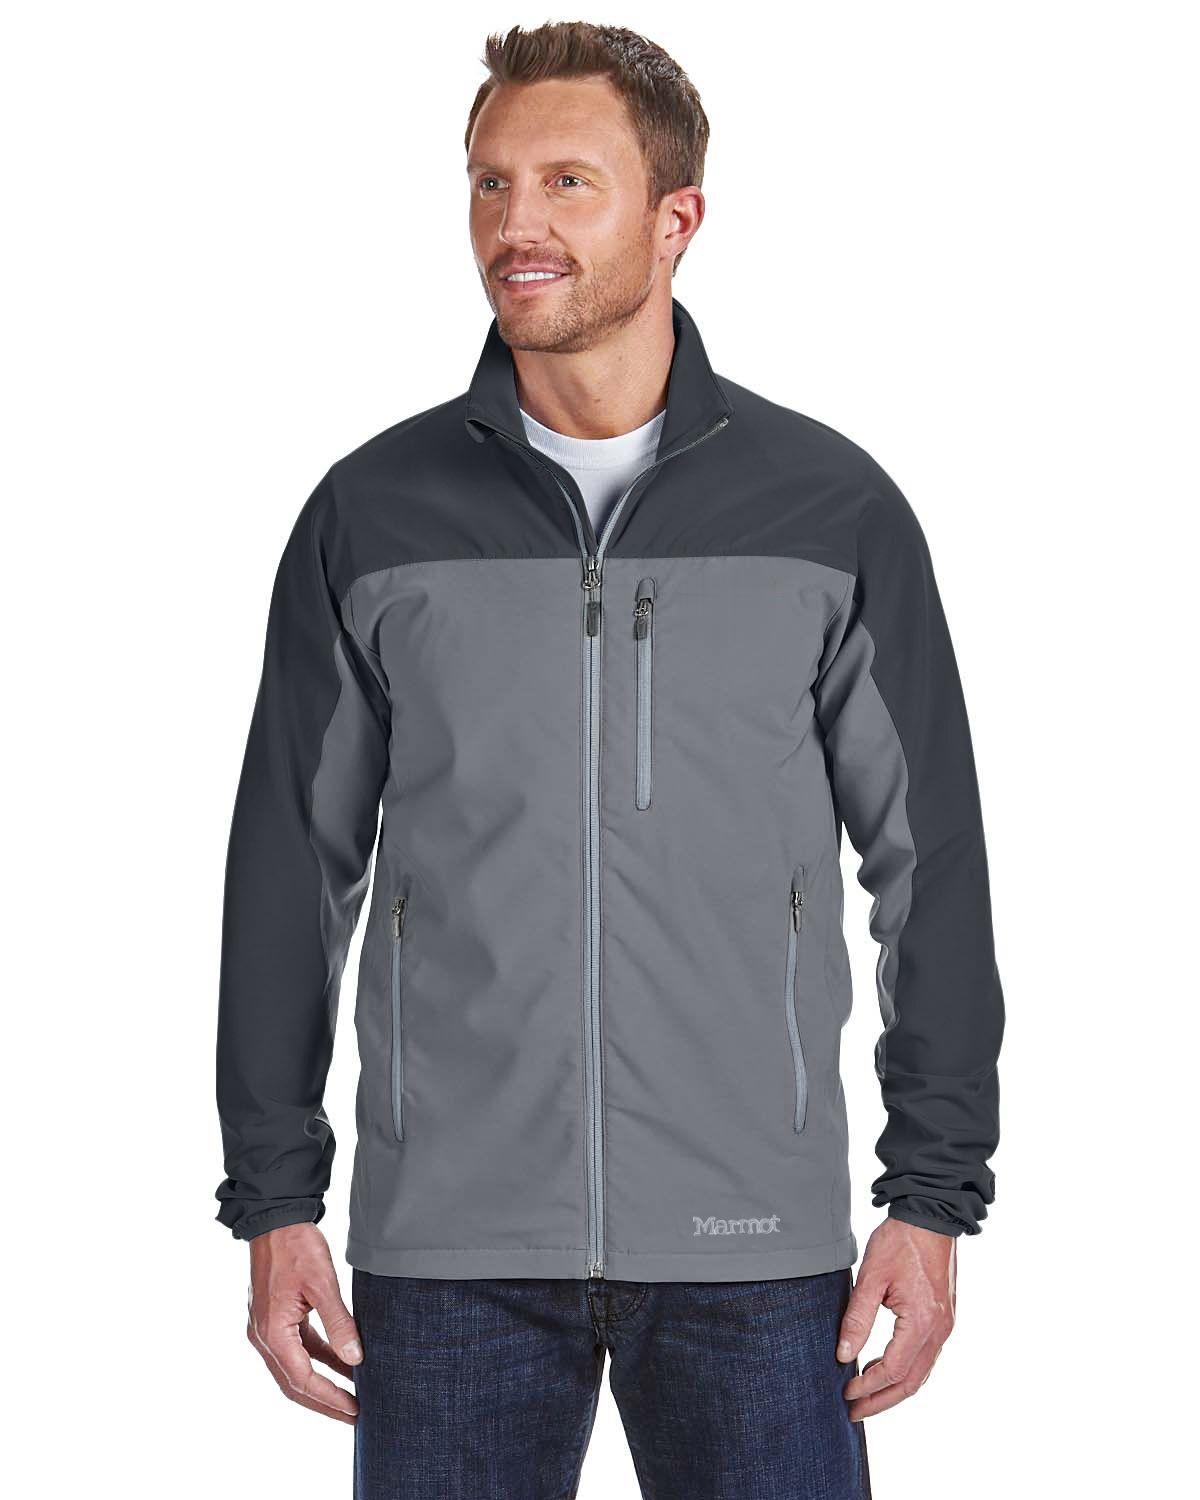 Size Chart for Marmot 98260 Mens Tempo Jacket - A2ZClothing.com